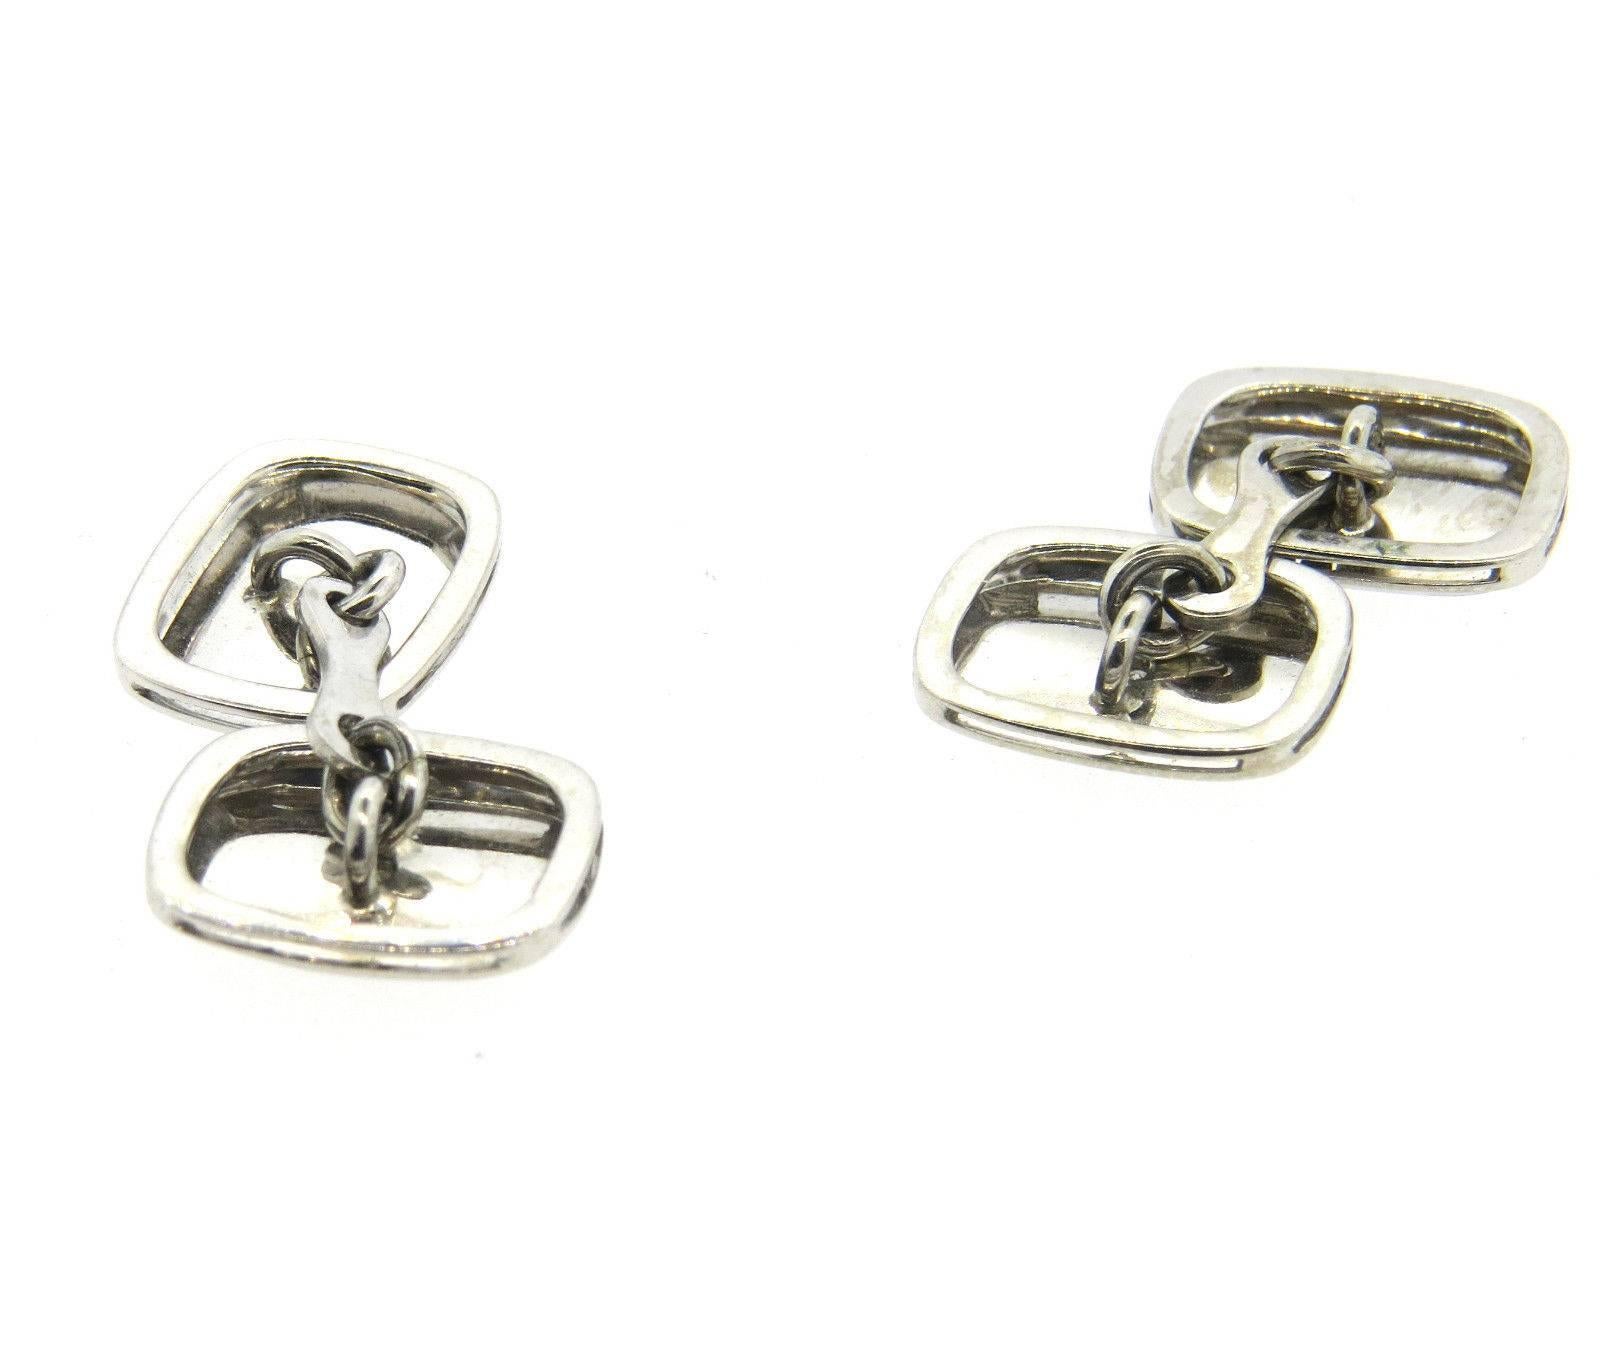 A pair of 18k white gold cufflinks set with 0.04ctw of H/VS diamonds.	 Each top measures 15mm x 12mm.  The weight of the cufflinks is 8.3 grams.